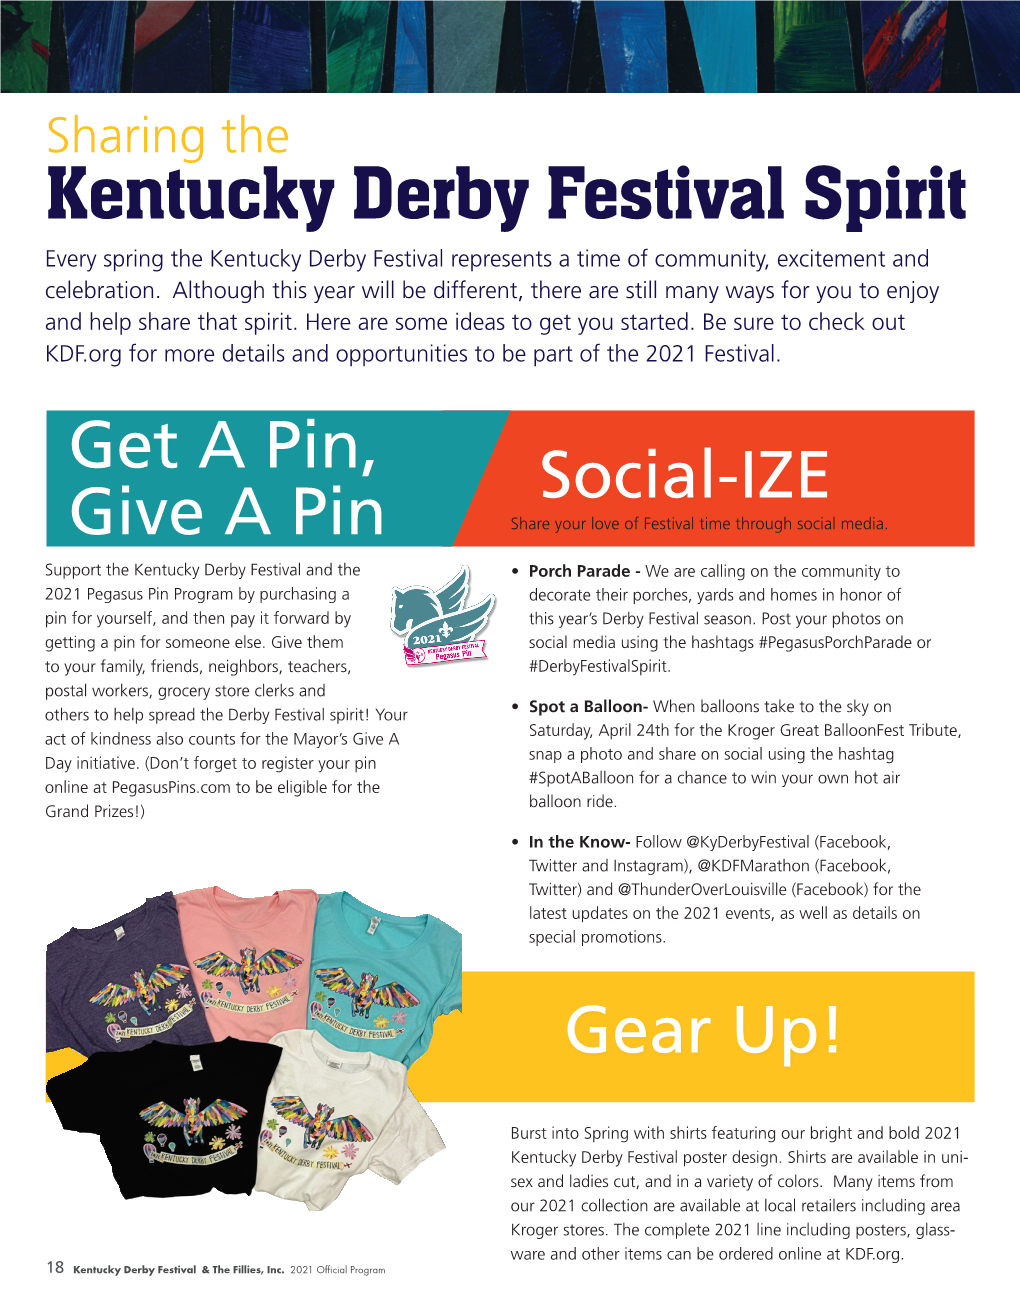 Kentucky Derby Festival Spirit Every Spring the Kentucky Derby Festival Represents a Time of Community, Excitement and Celebration